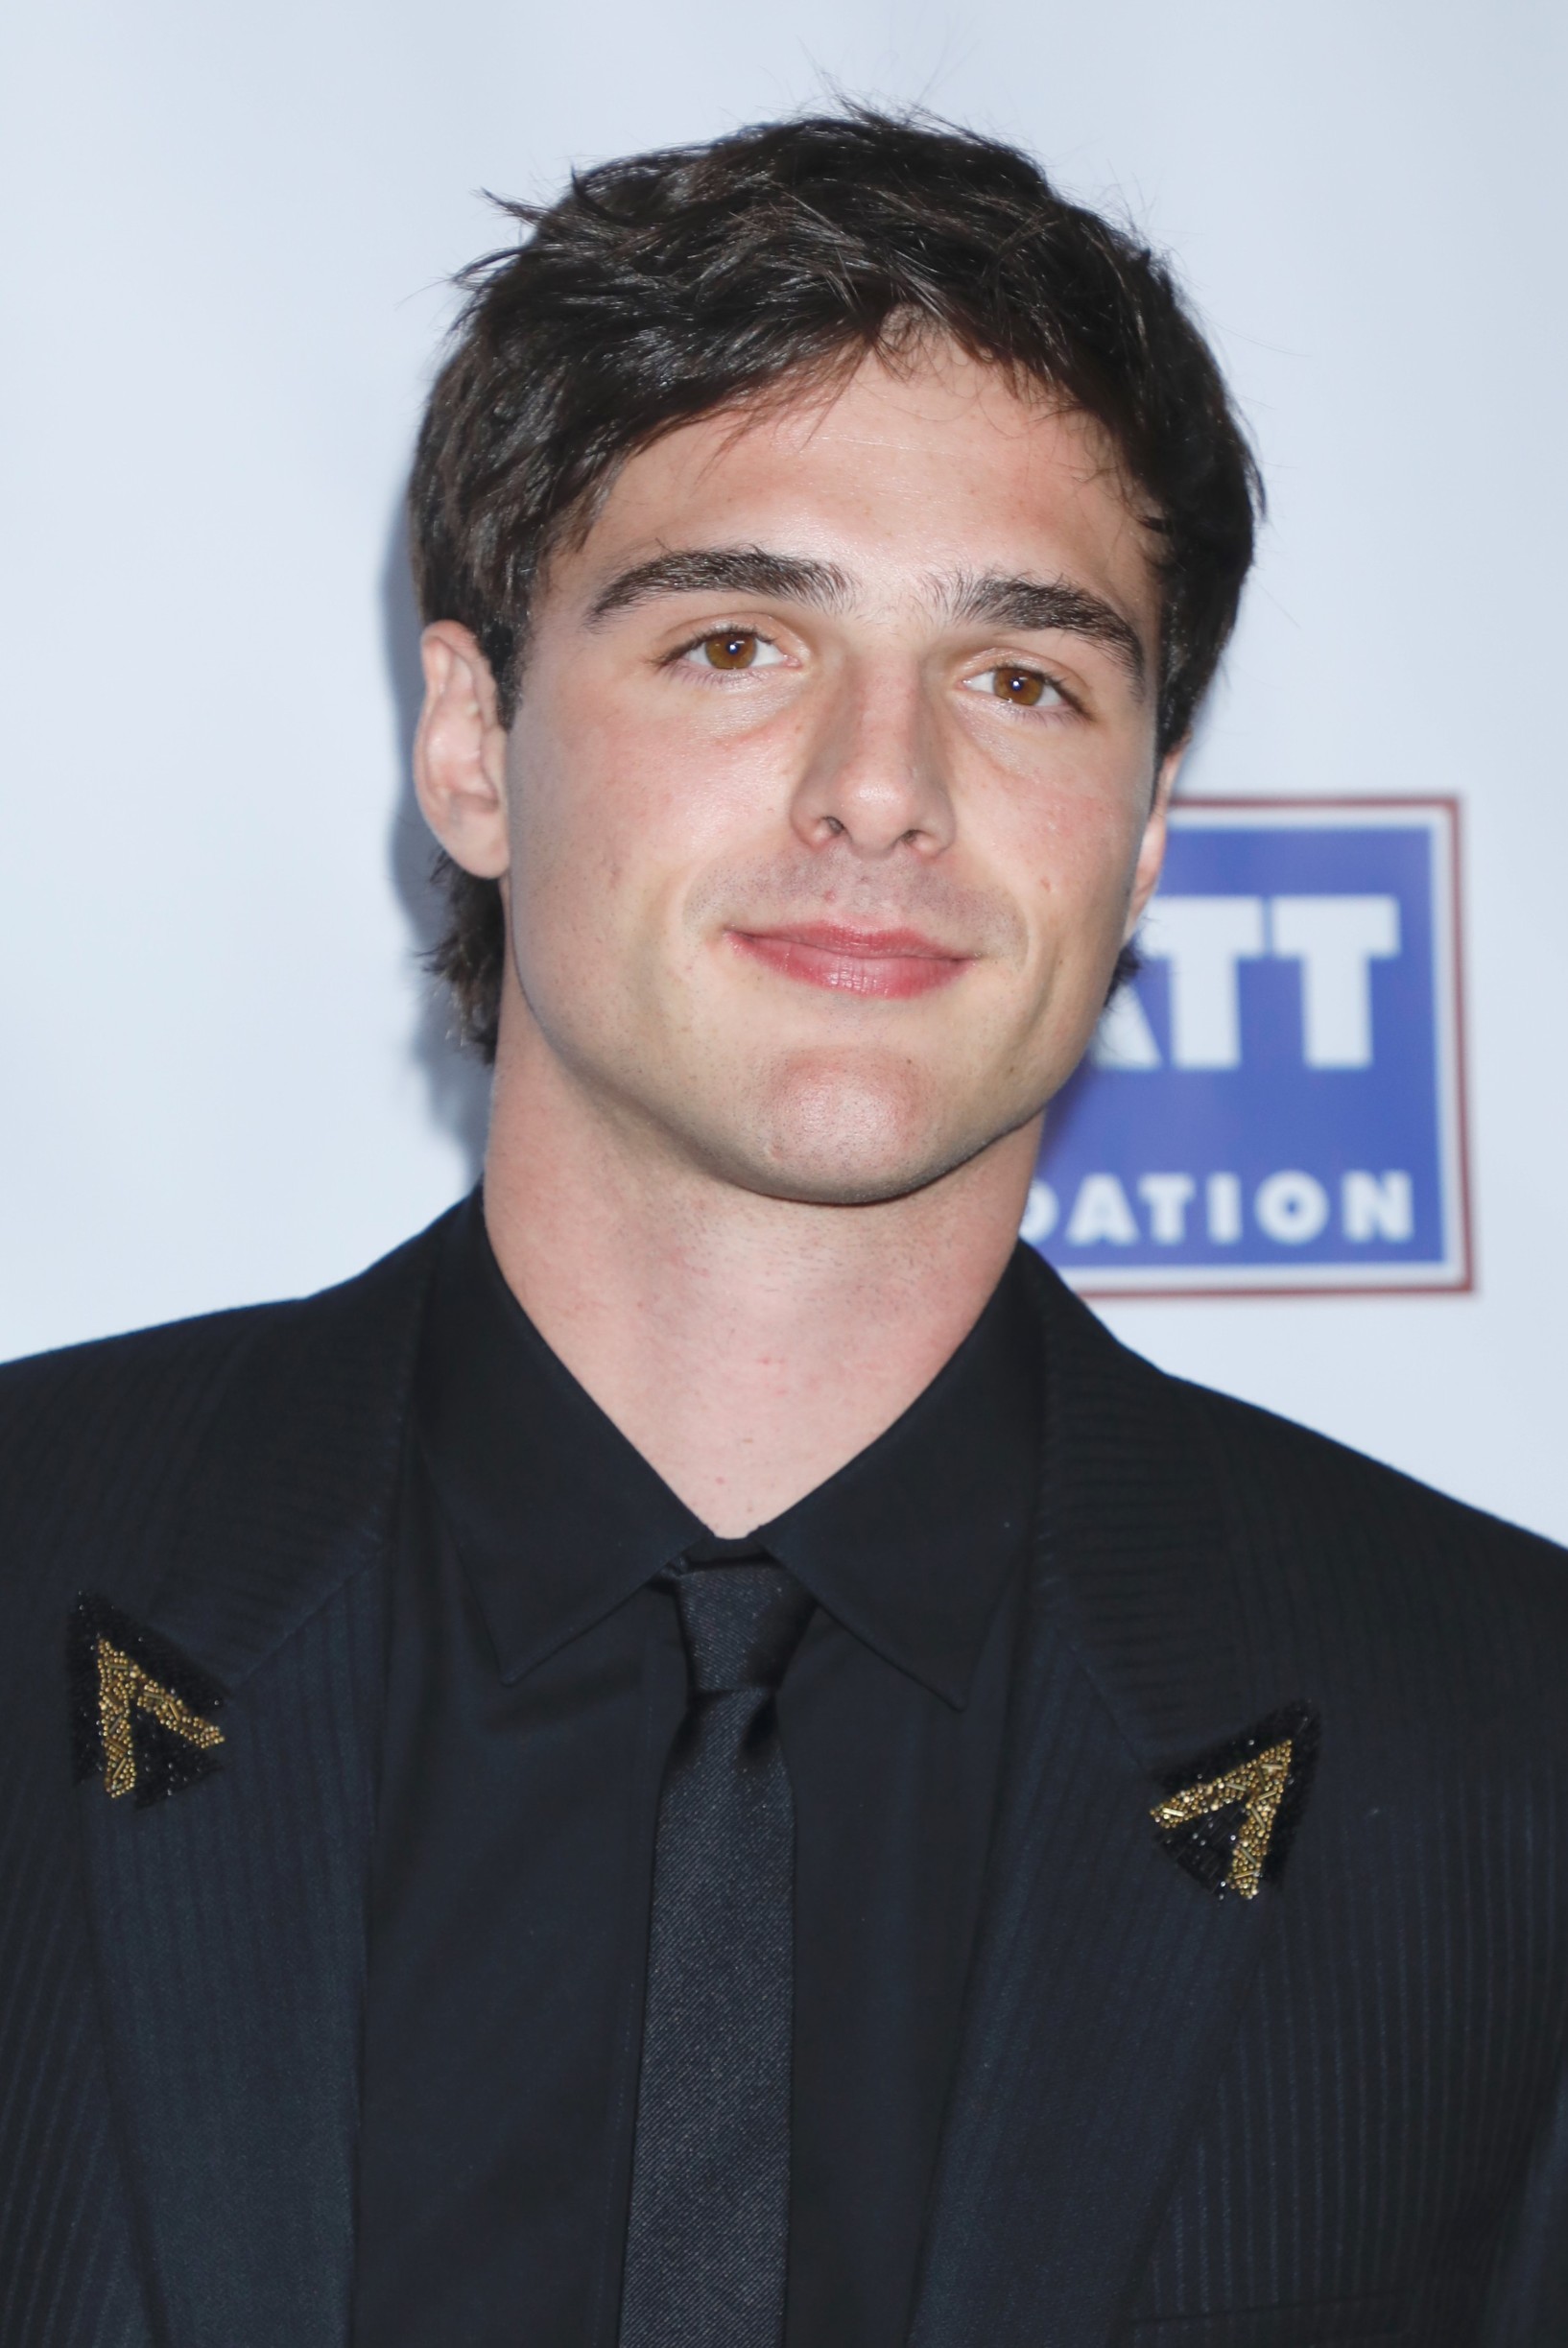 Jacob Elordi
American Australian Association Arts Awards, New York, USA - 30 Jan 2020,Image: 495677985, License: Rights-managed, Restrictions: , Model Release: no, Credit line: Gregory Pace / Shutterstock Editorial / Profimedia